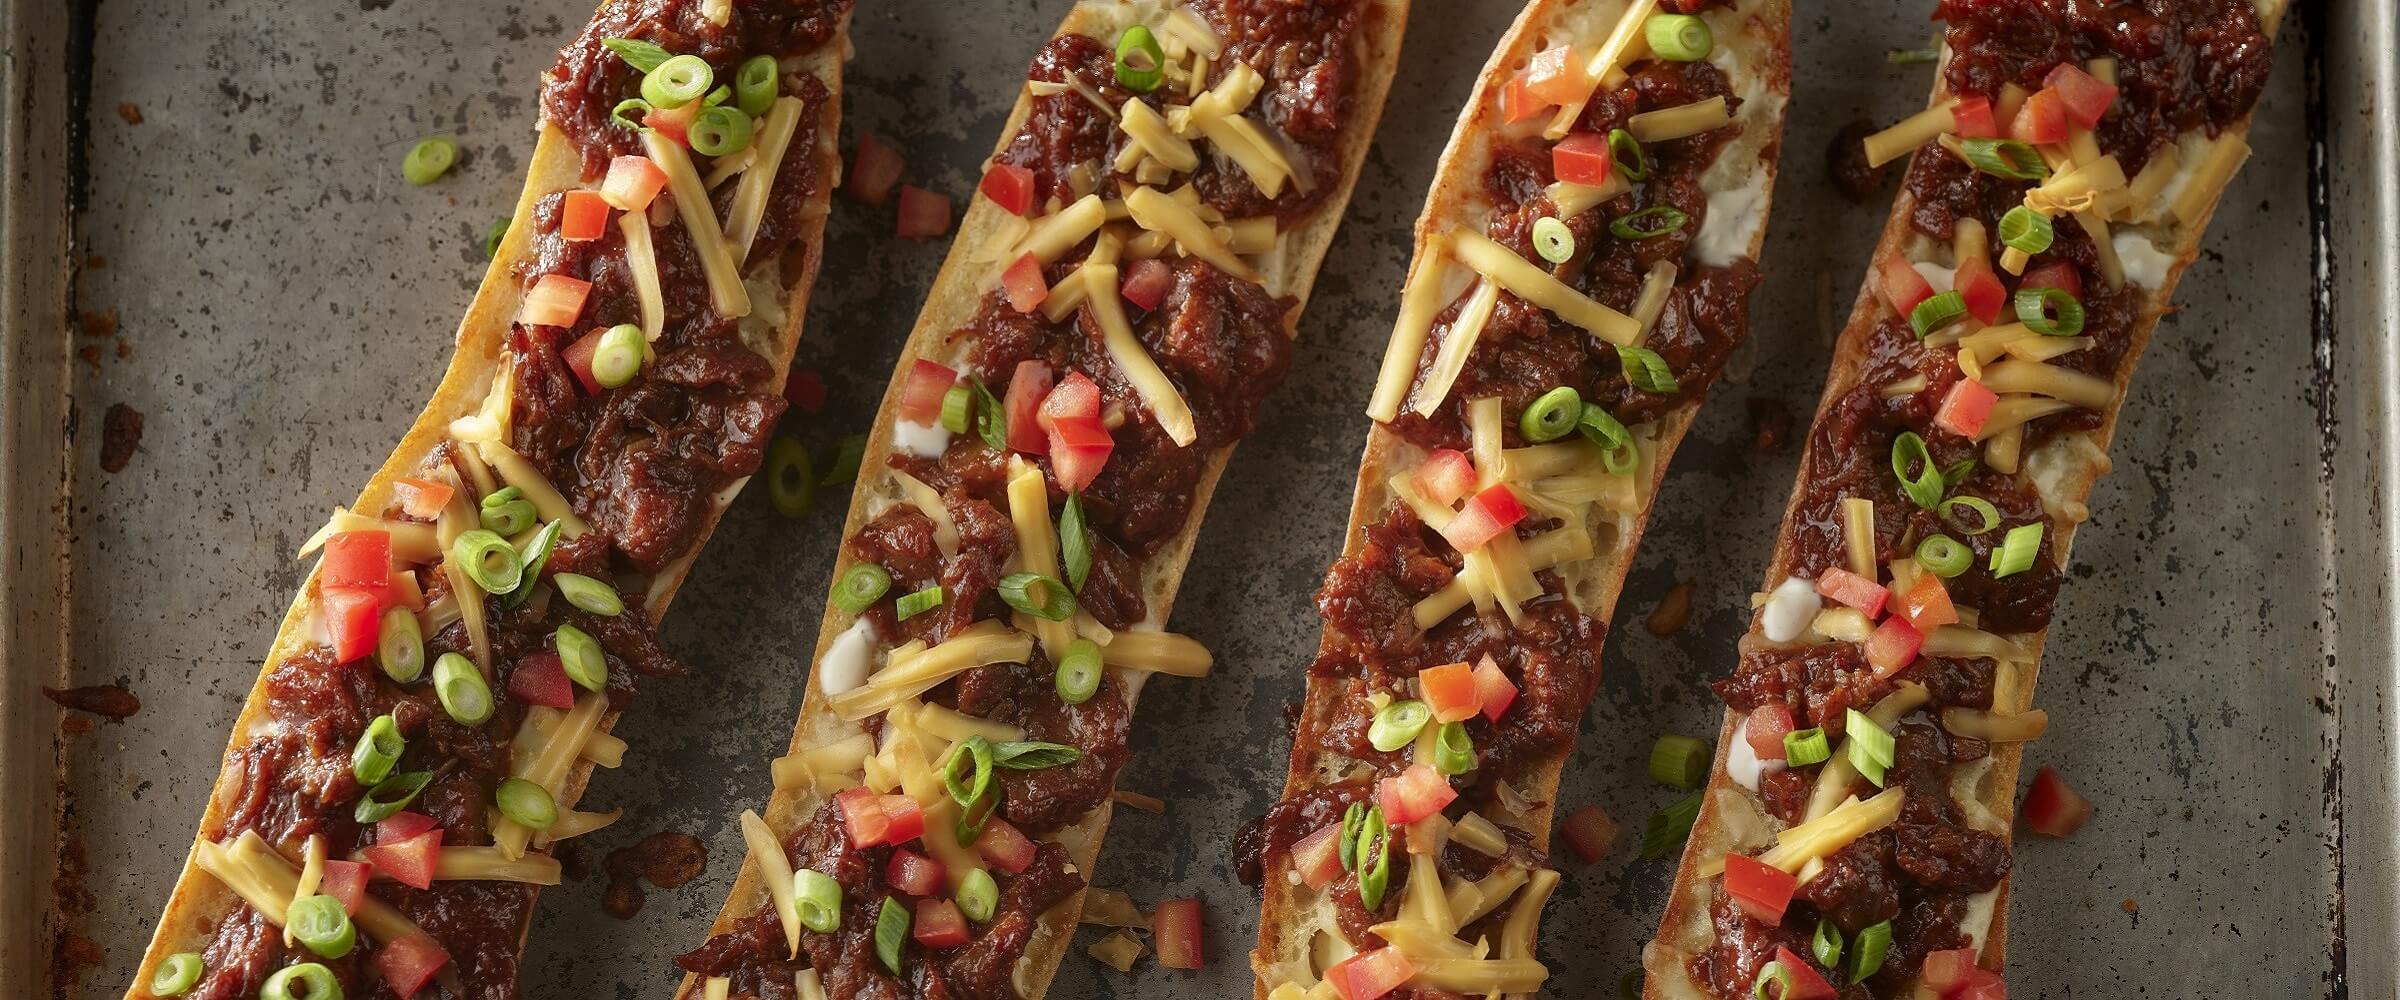 BBQ ranch baguette pizza topped with cheese, tomatoes and green onions on sheet pan